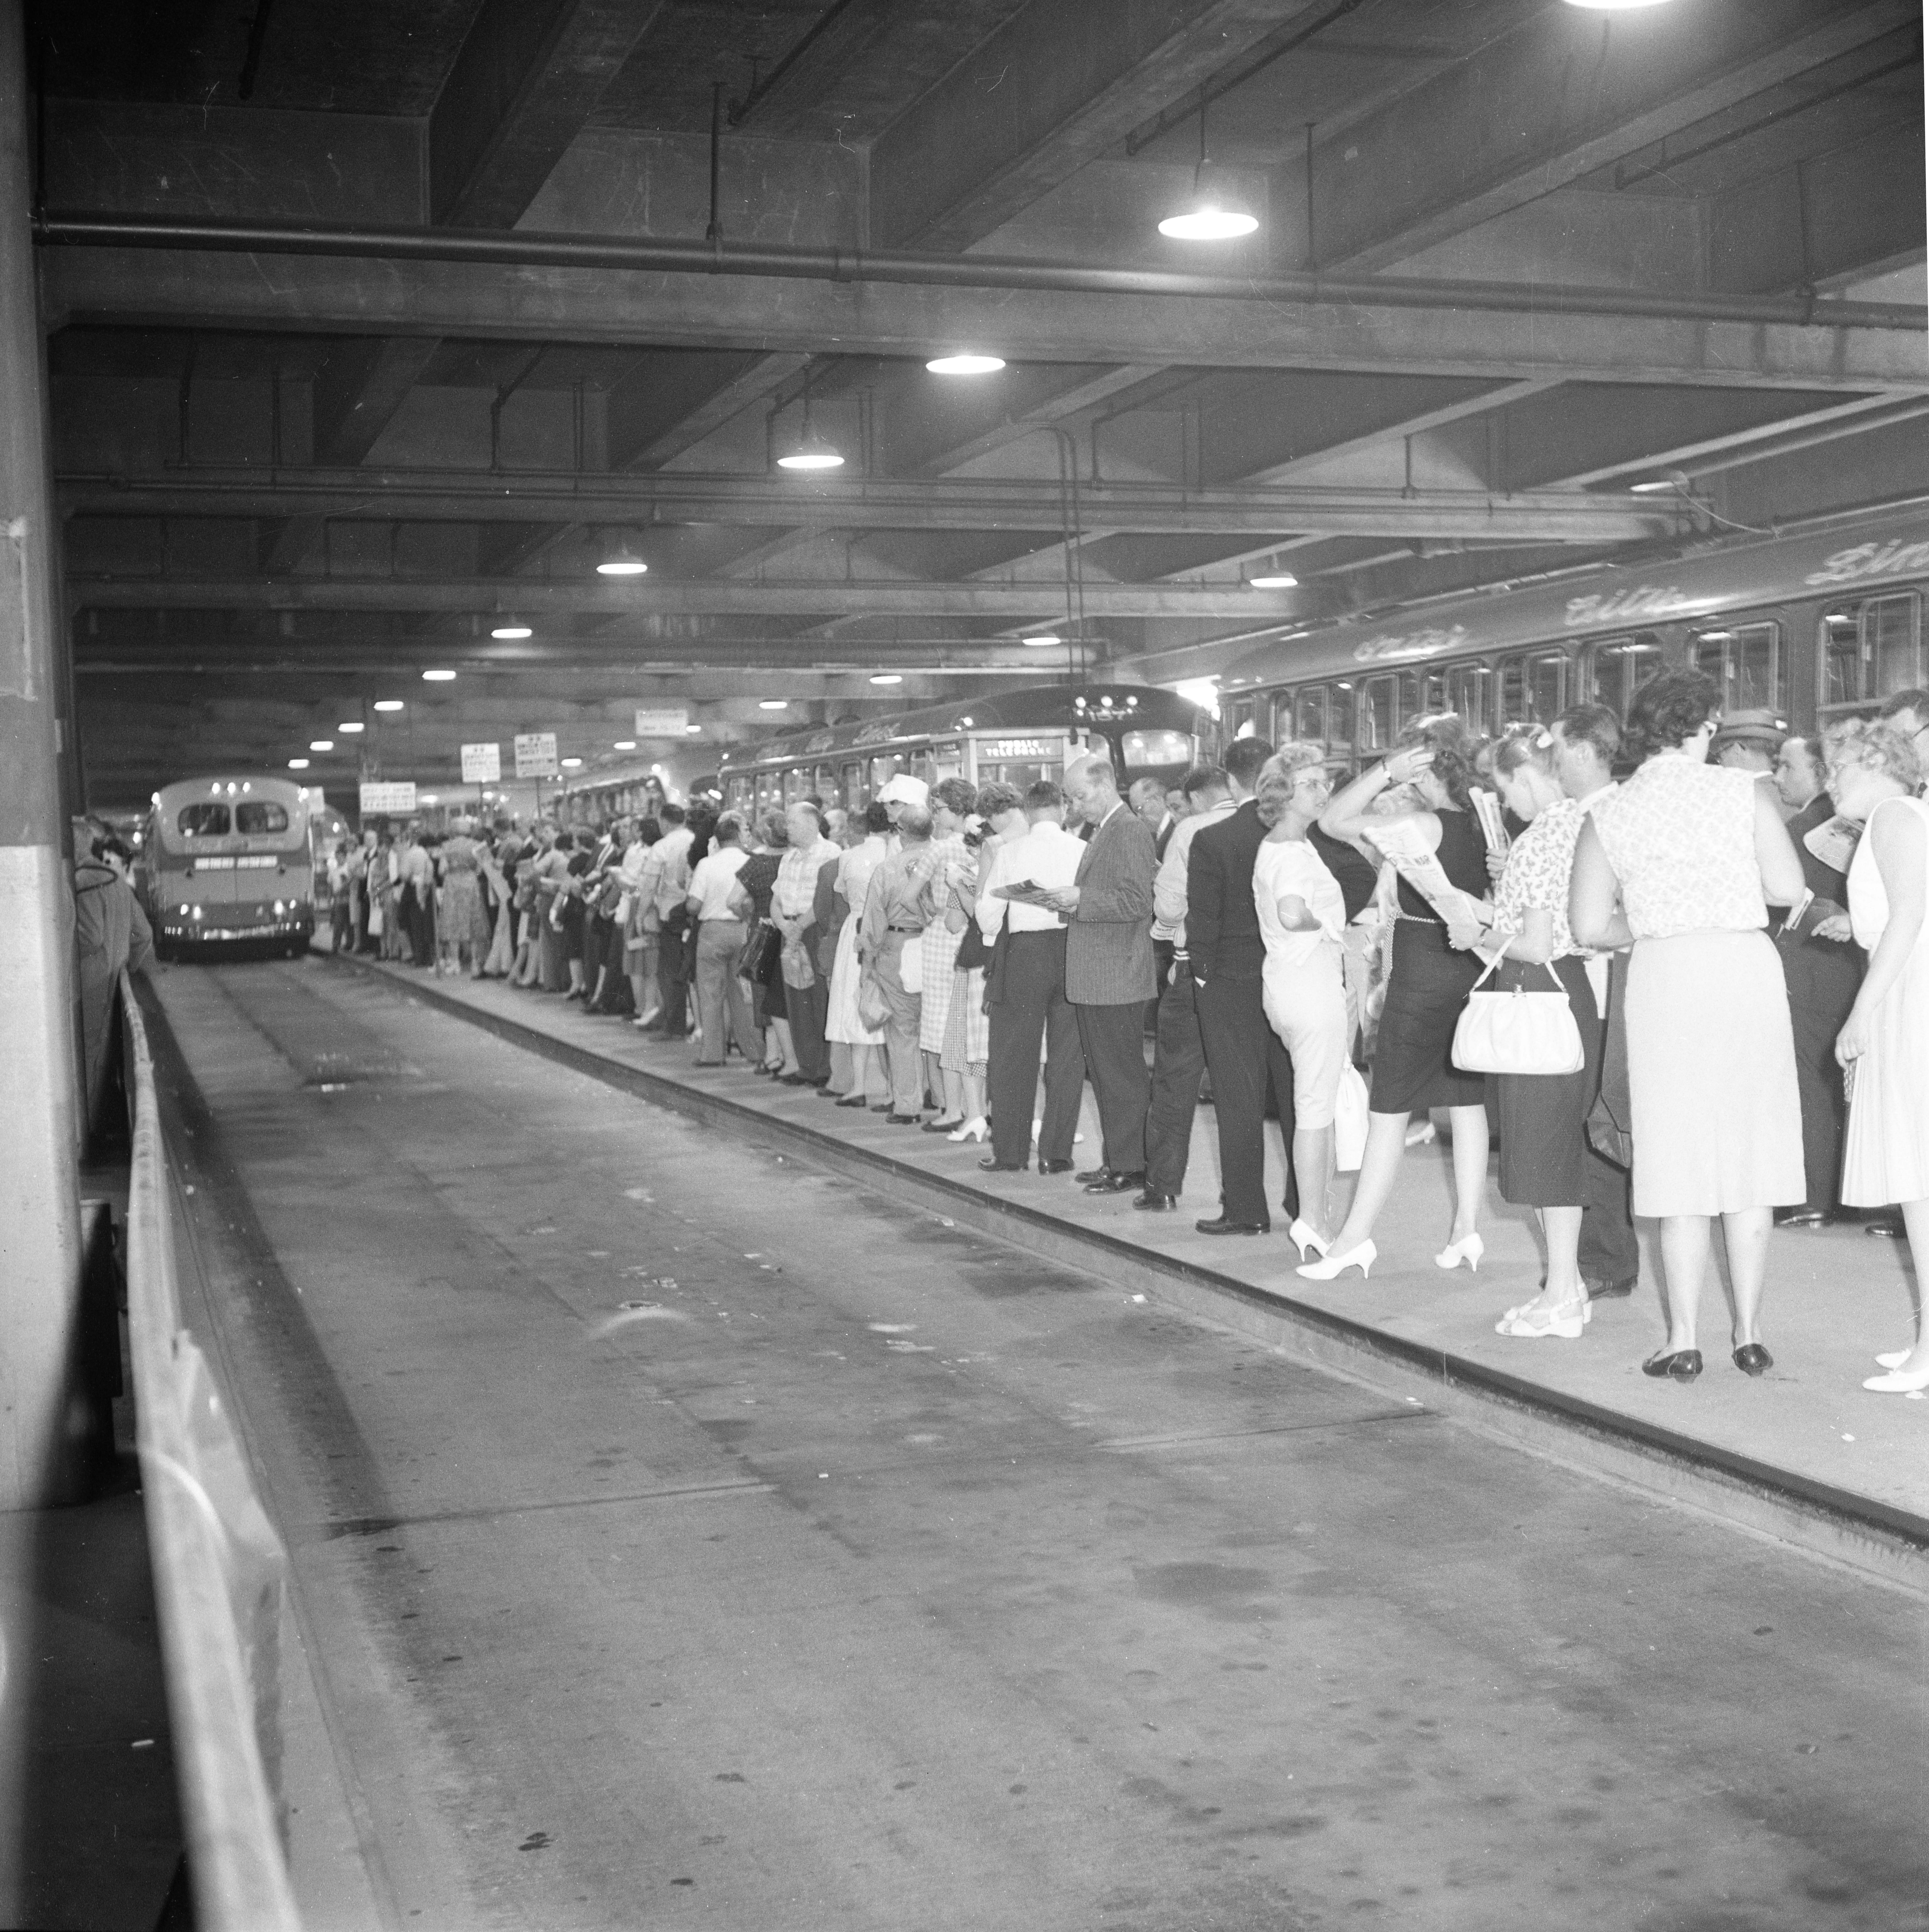 Inside New York City's Port Authority Bus Terminal, July 7, 1960.